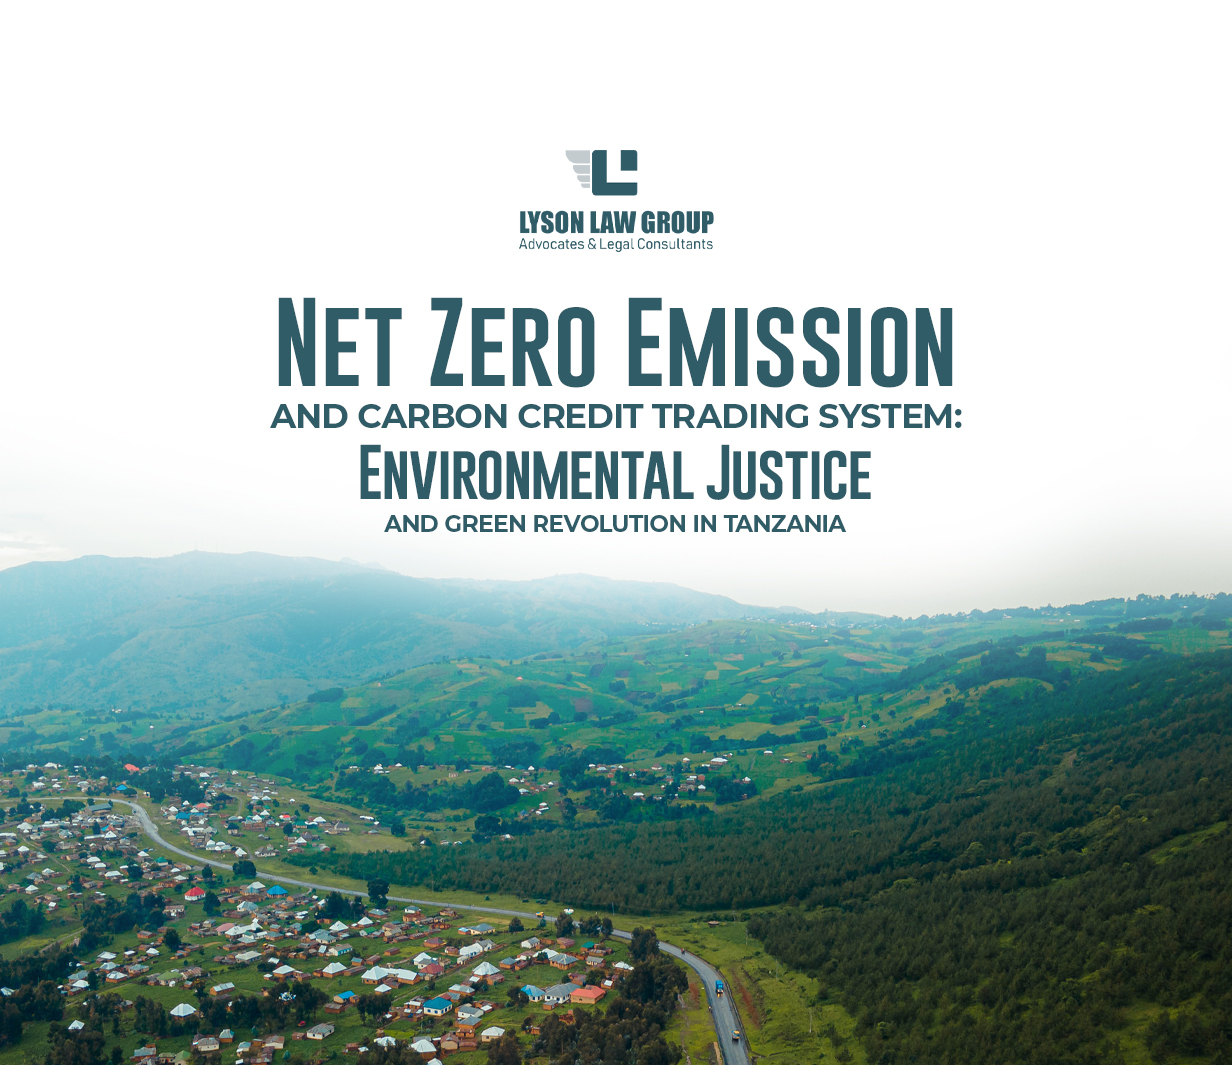 Net Zero Carbon Emission and Carbon credit Trading System: Environmental Justice and Green Revolution in Tanzania.